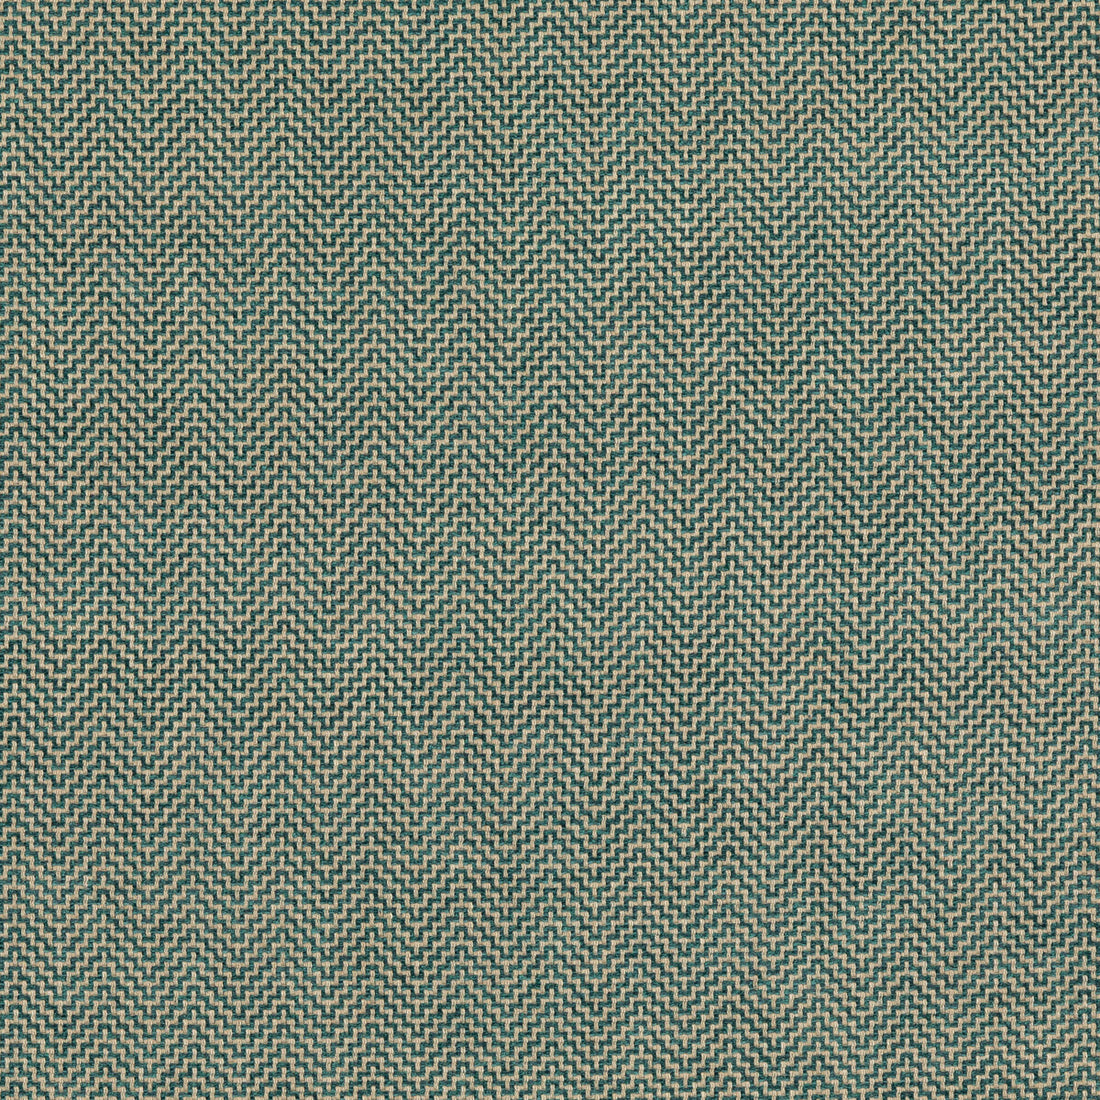 Glanville fabric in teal color - pattern BF10873.615.0 - by G P &amp; J Baker in the Essential Colours II collection